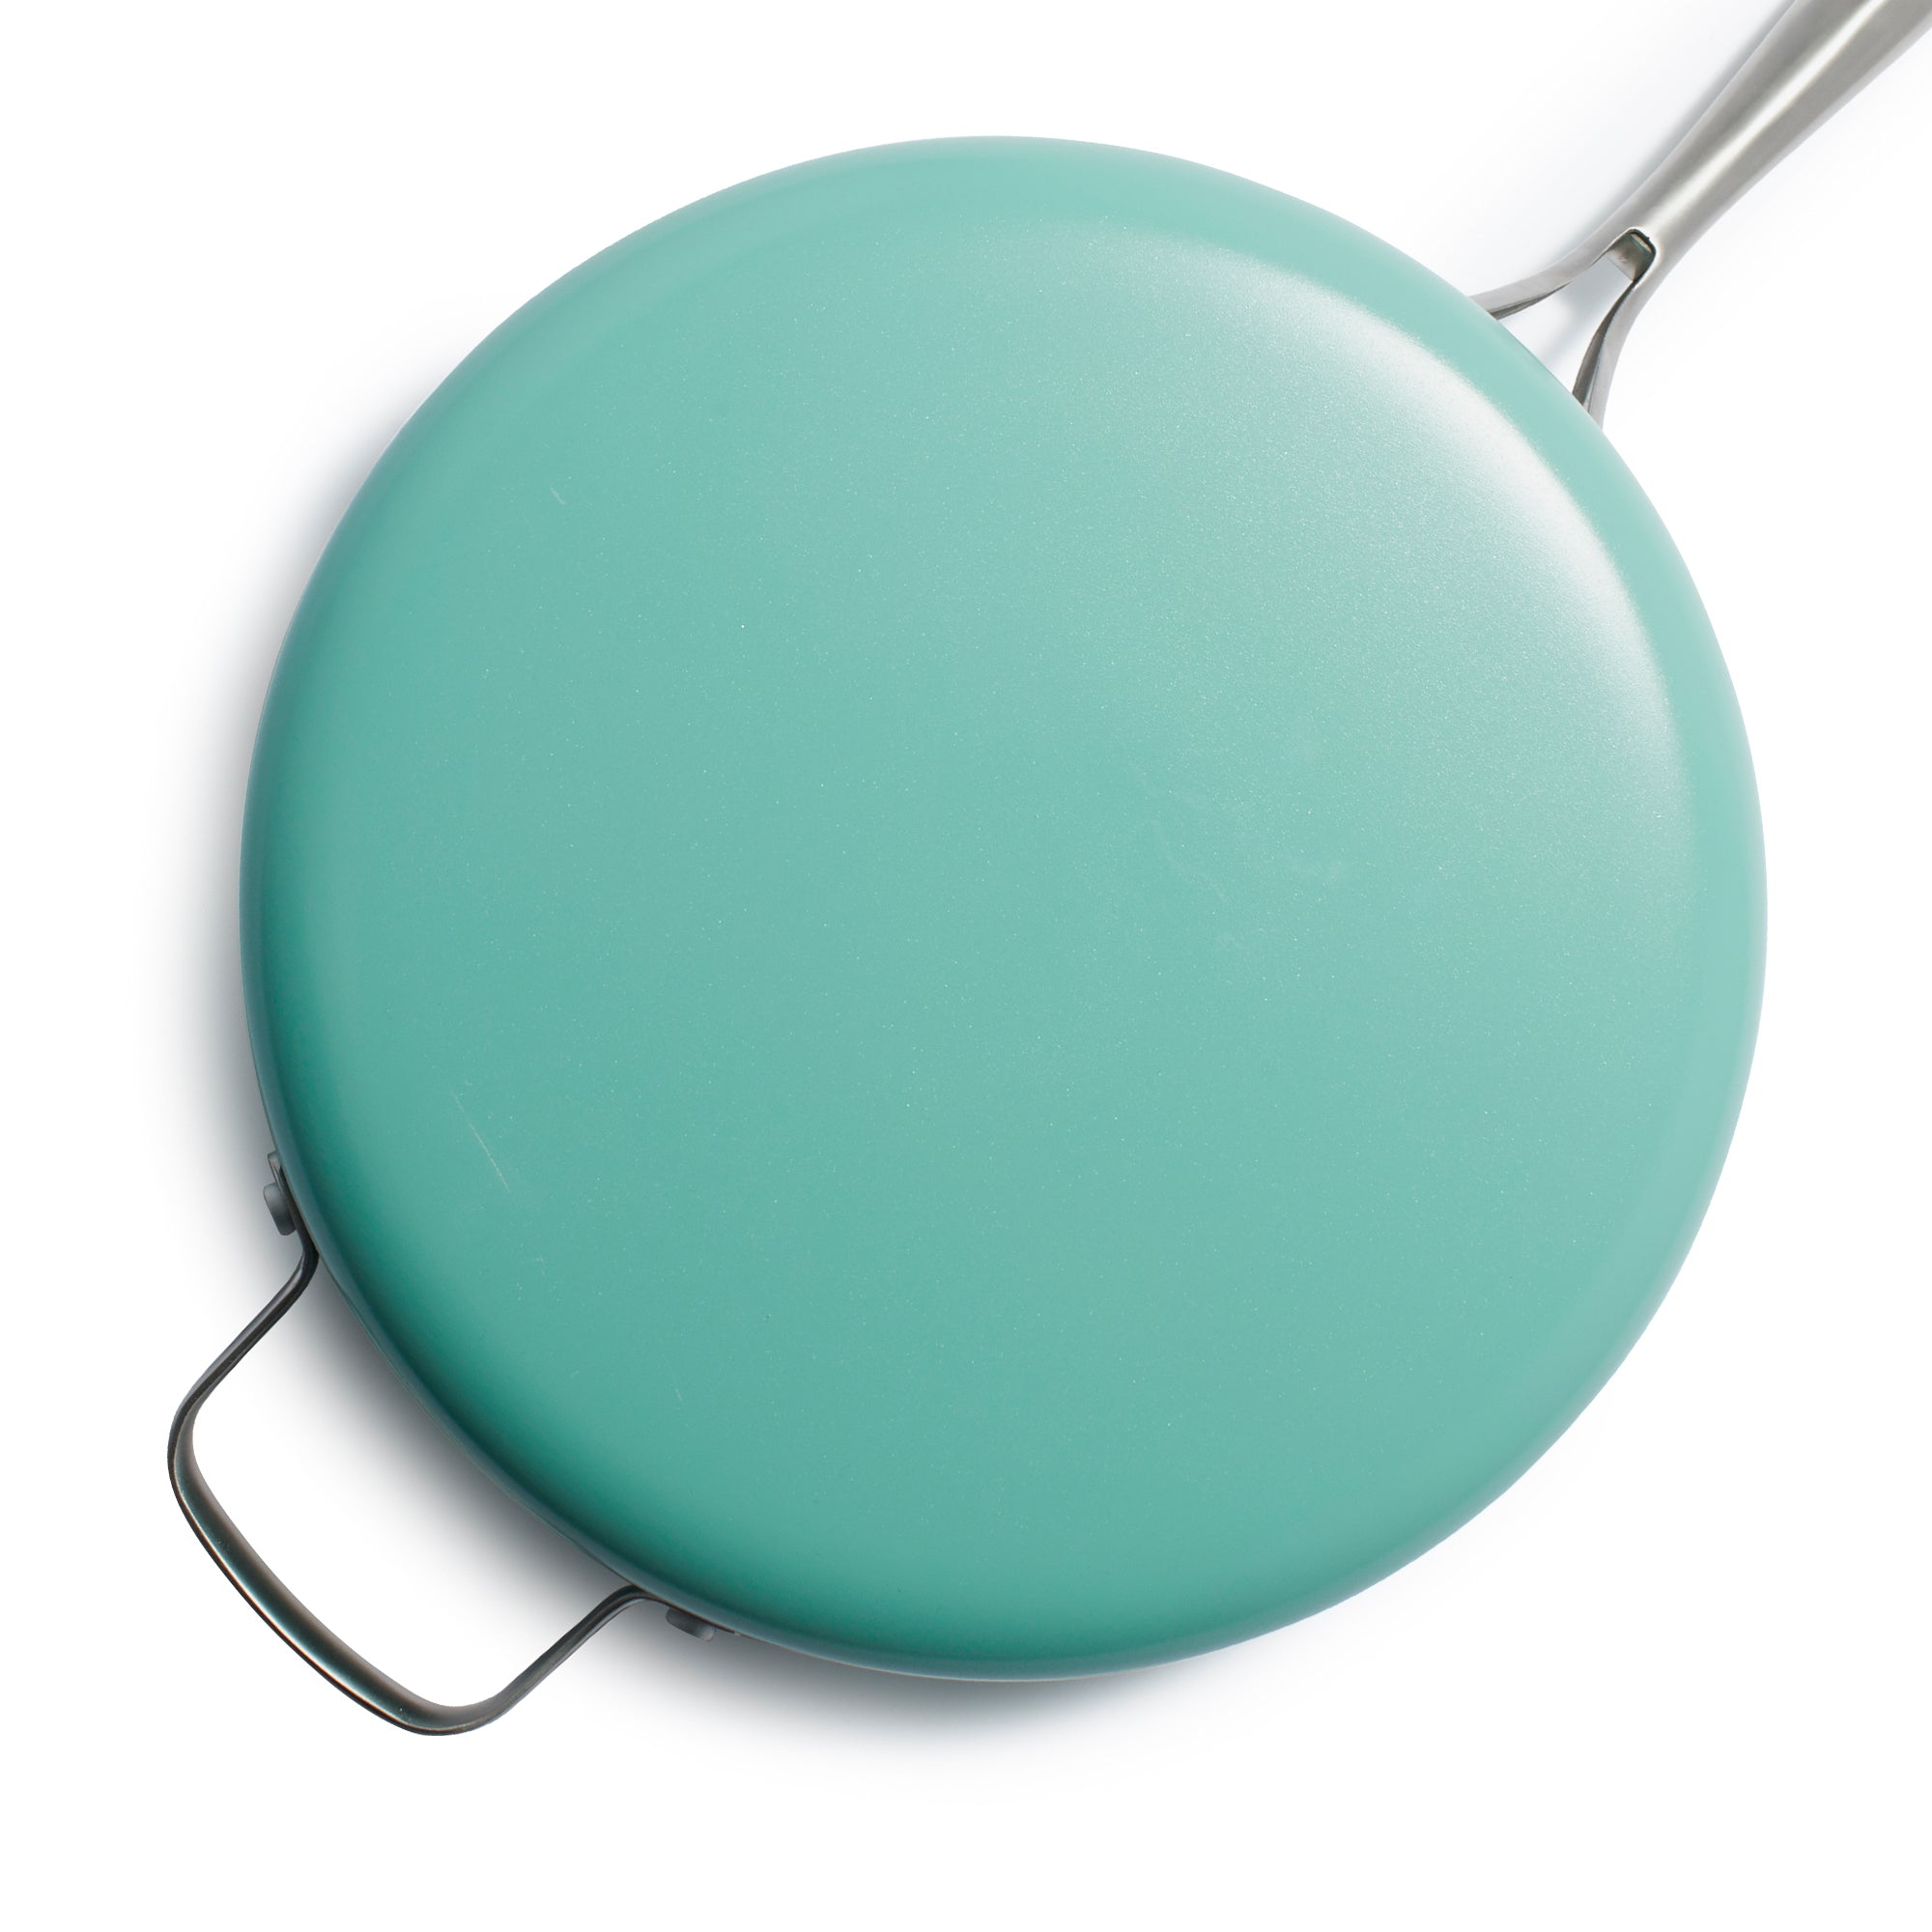 GreenLife Diamond 5 qt. Aluminum Ceramic Nonstick Saute Pan in Turquoise  with Glass Lid CC002348-001 - The Home Depot